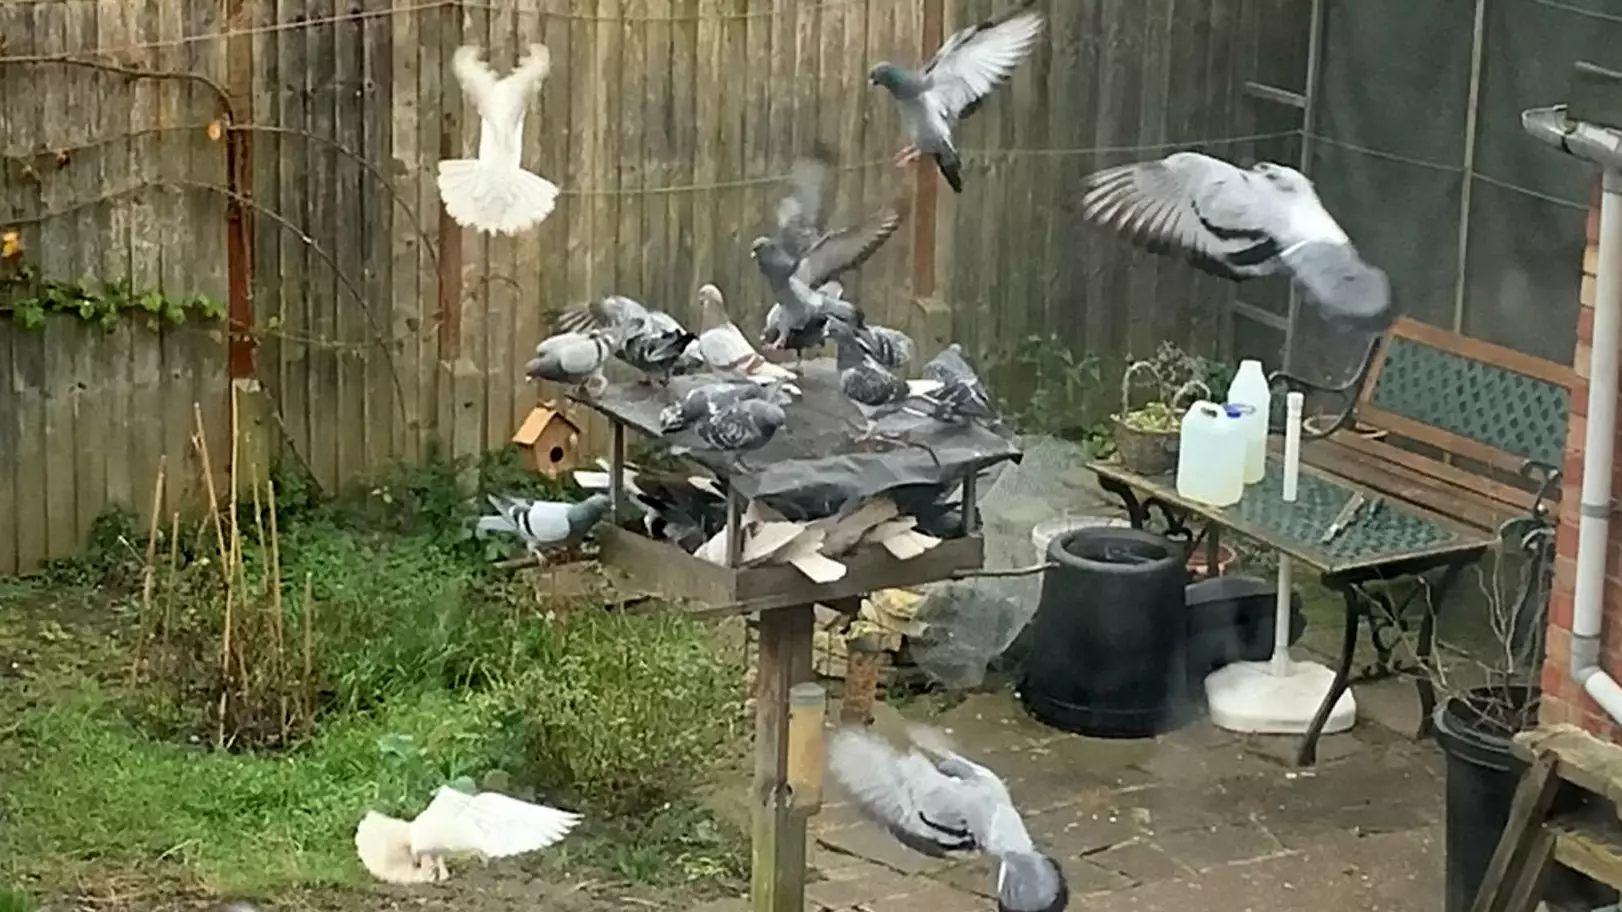 Pigeons 'S*** On Every Last Inch' Of Grandma's House After Neighbour Gets Bird Feeder